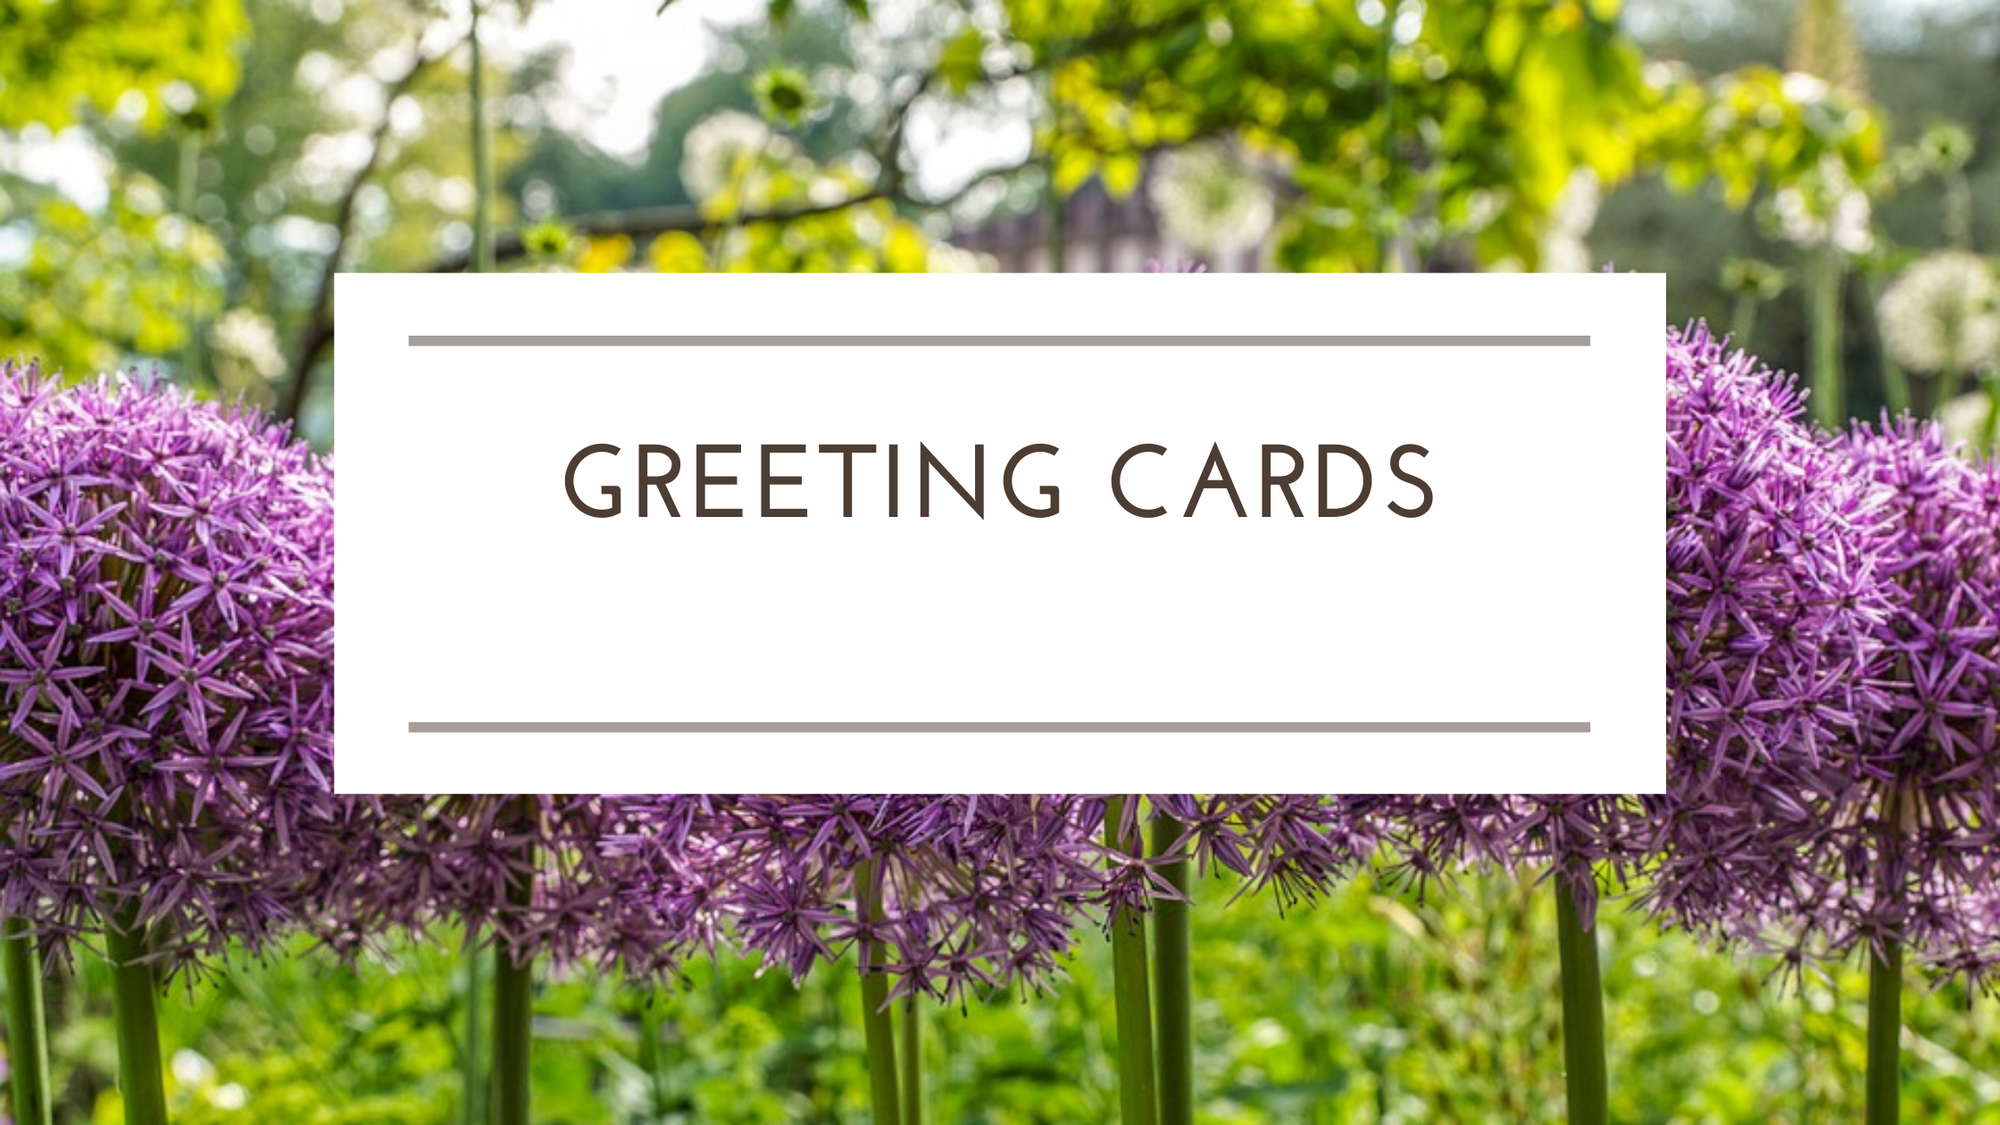 Greeting Cards for all occasions